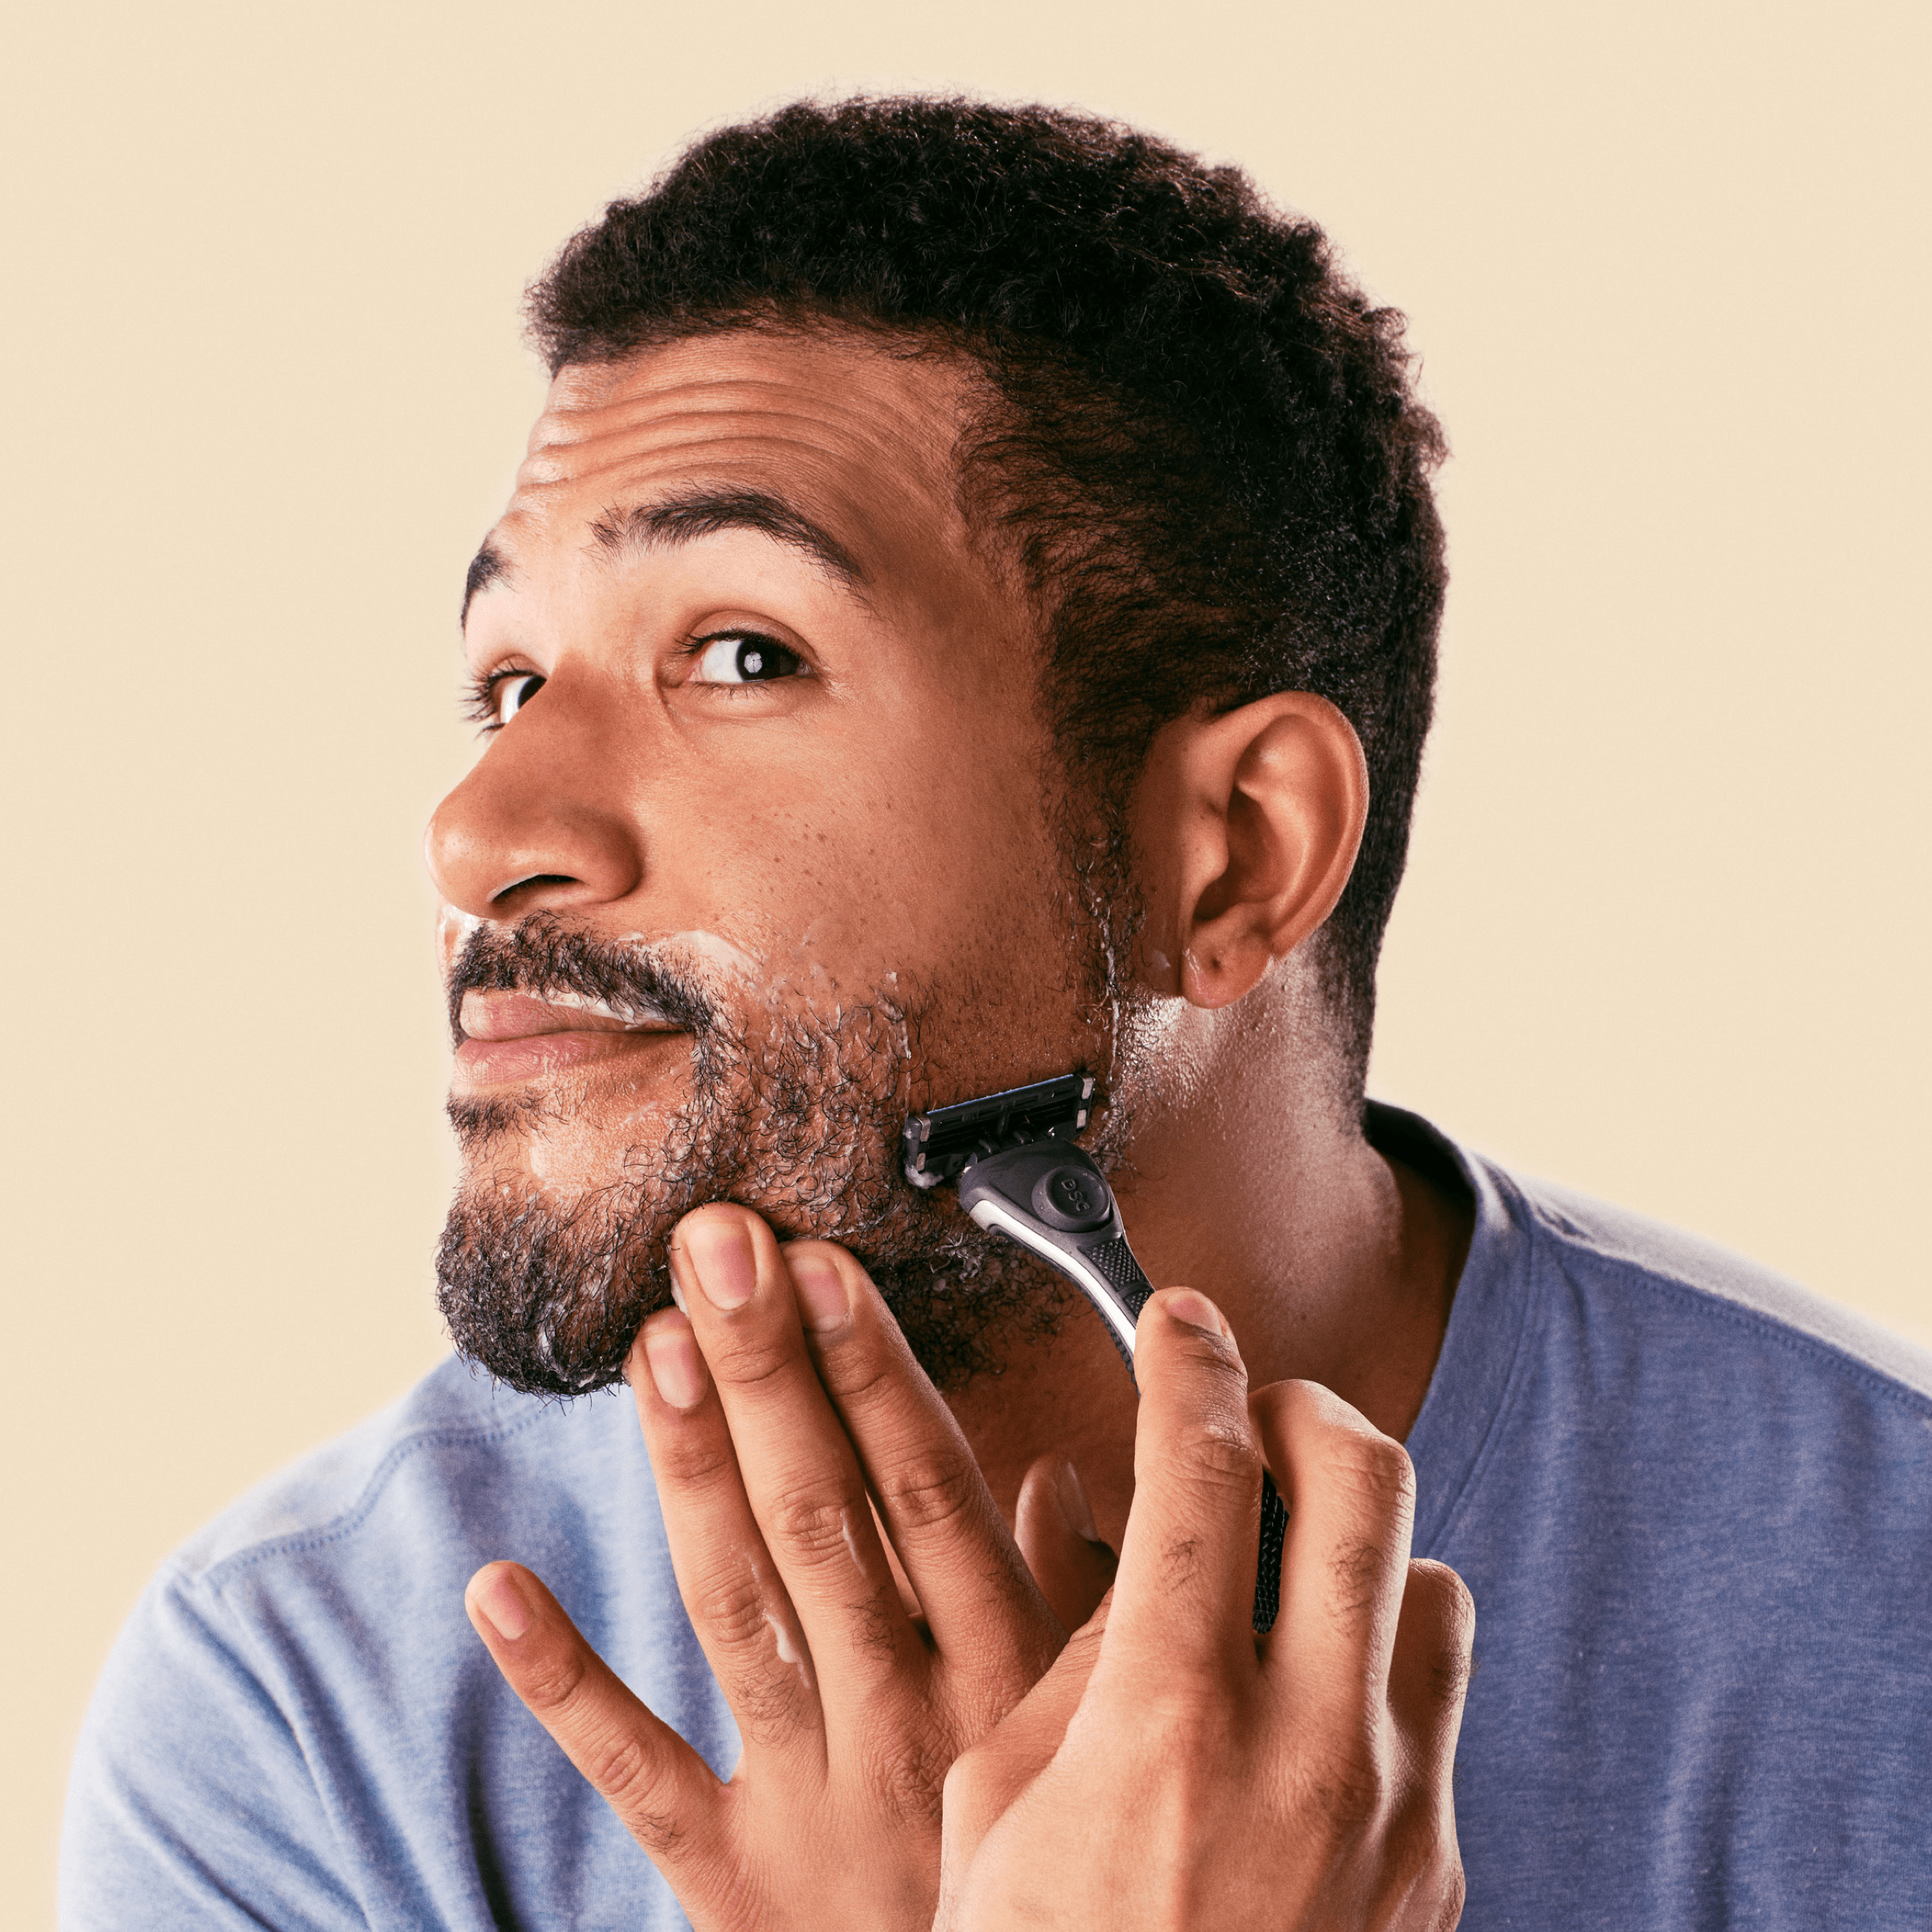 Man shaving with Dollar Shave Club Shave Butter.